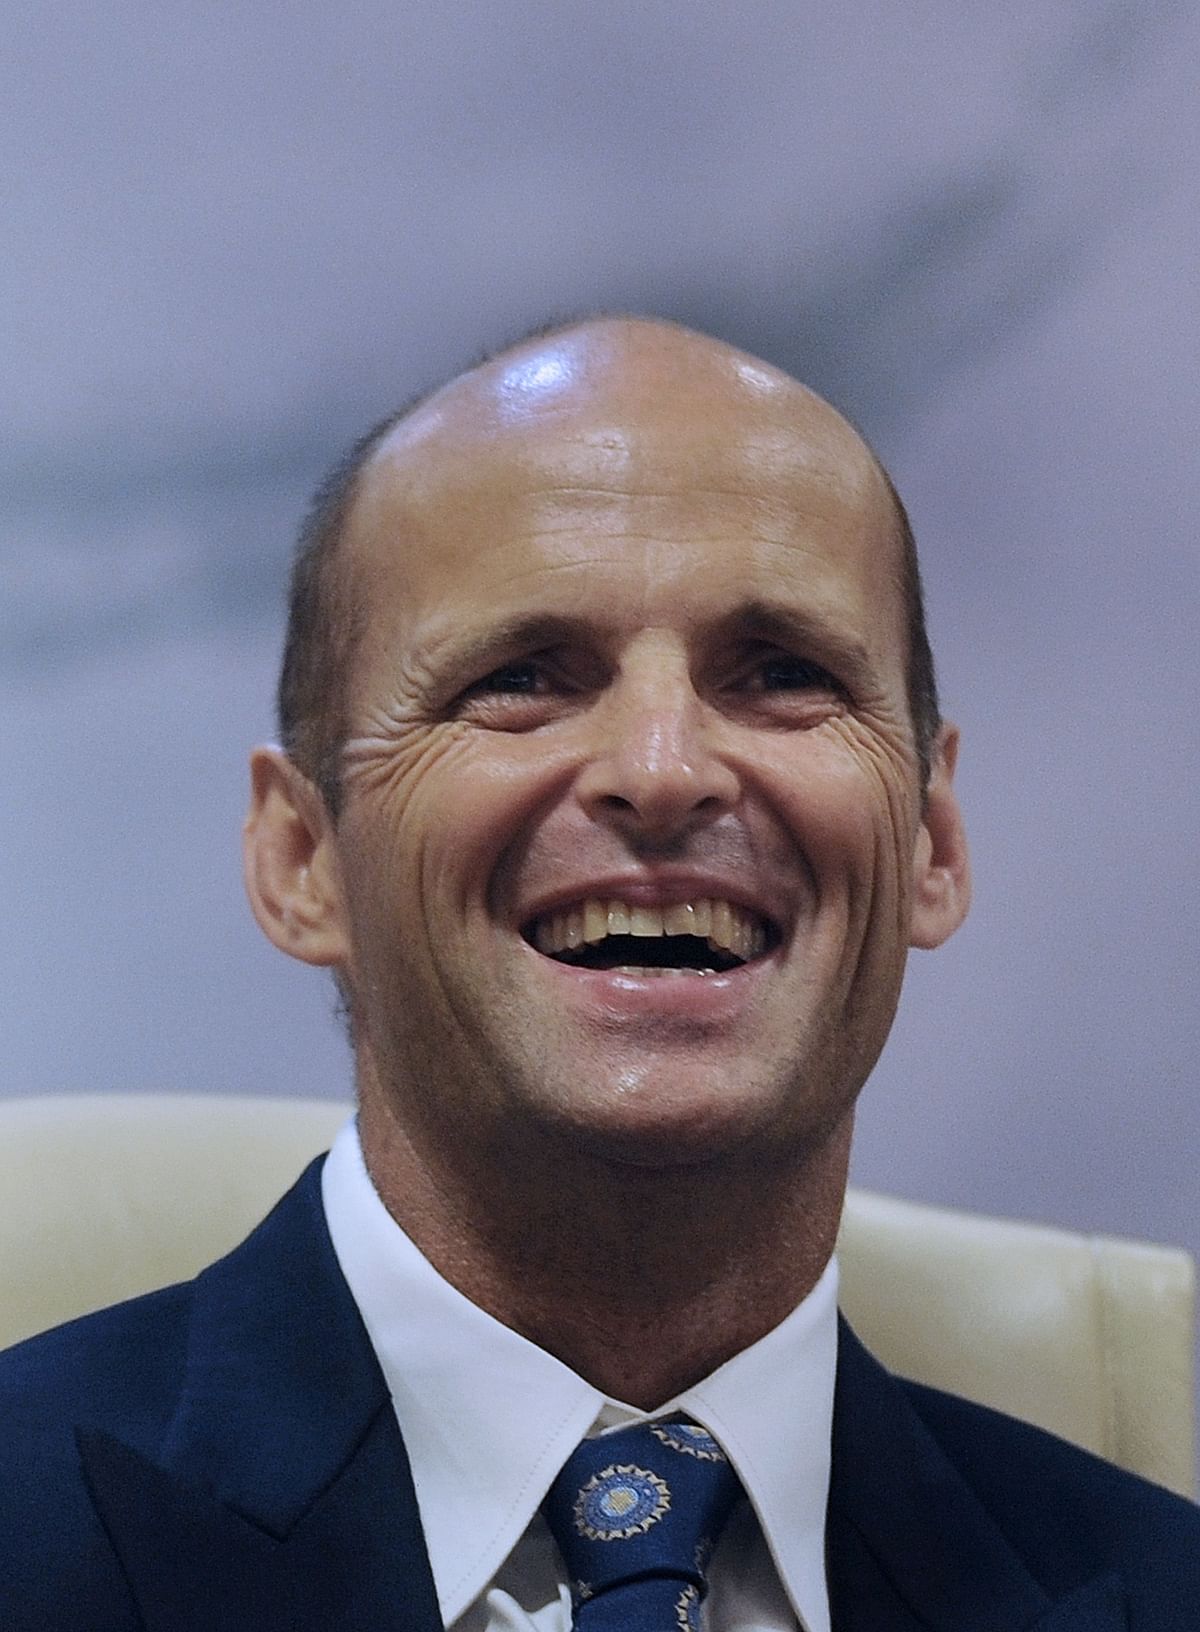 When BCCI stumped Gary Kirsten with a 7-minute interview